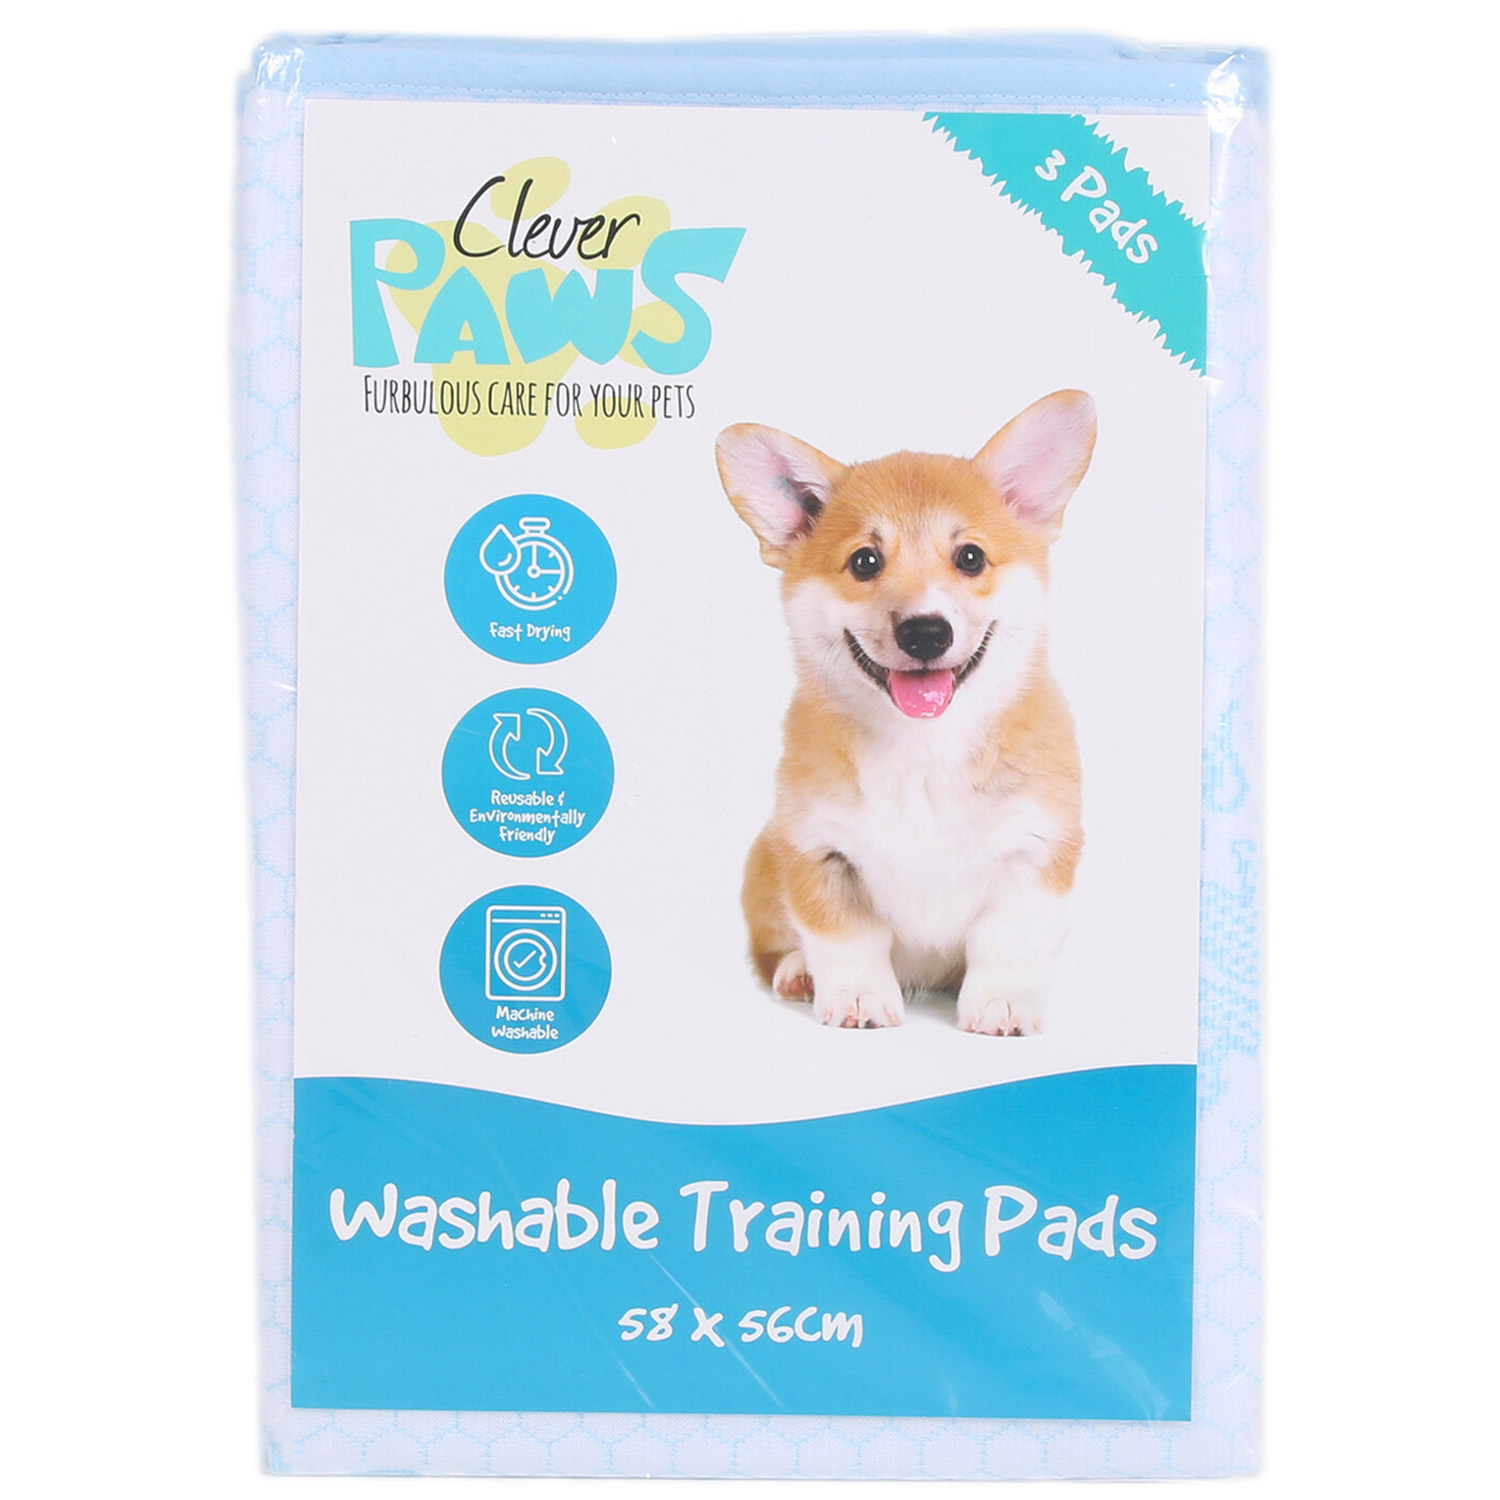 Clever Paws Washable Puppy Training Pads 3 Pack Image 1